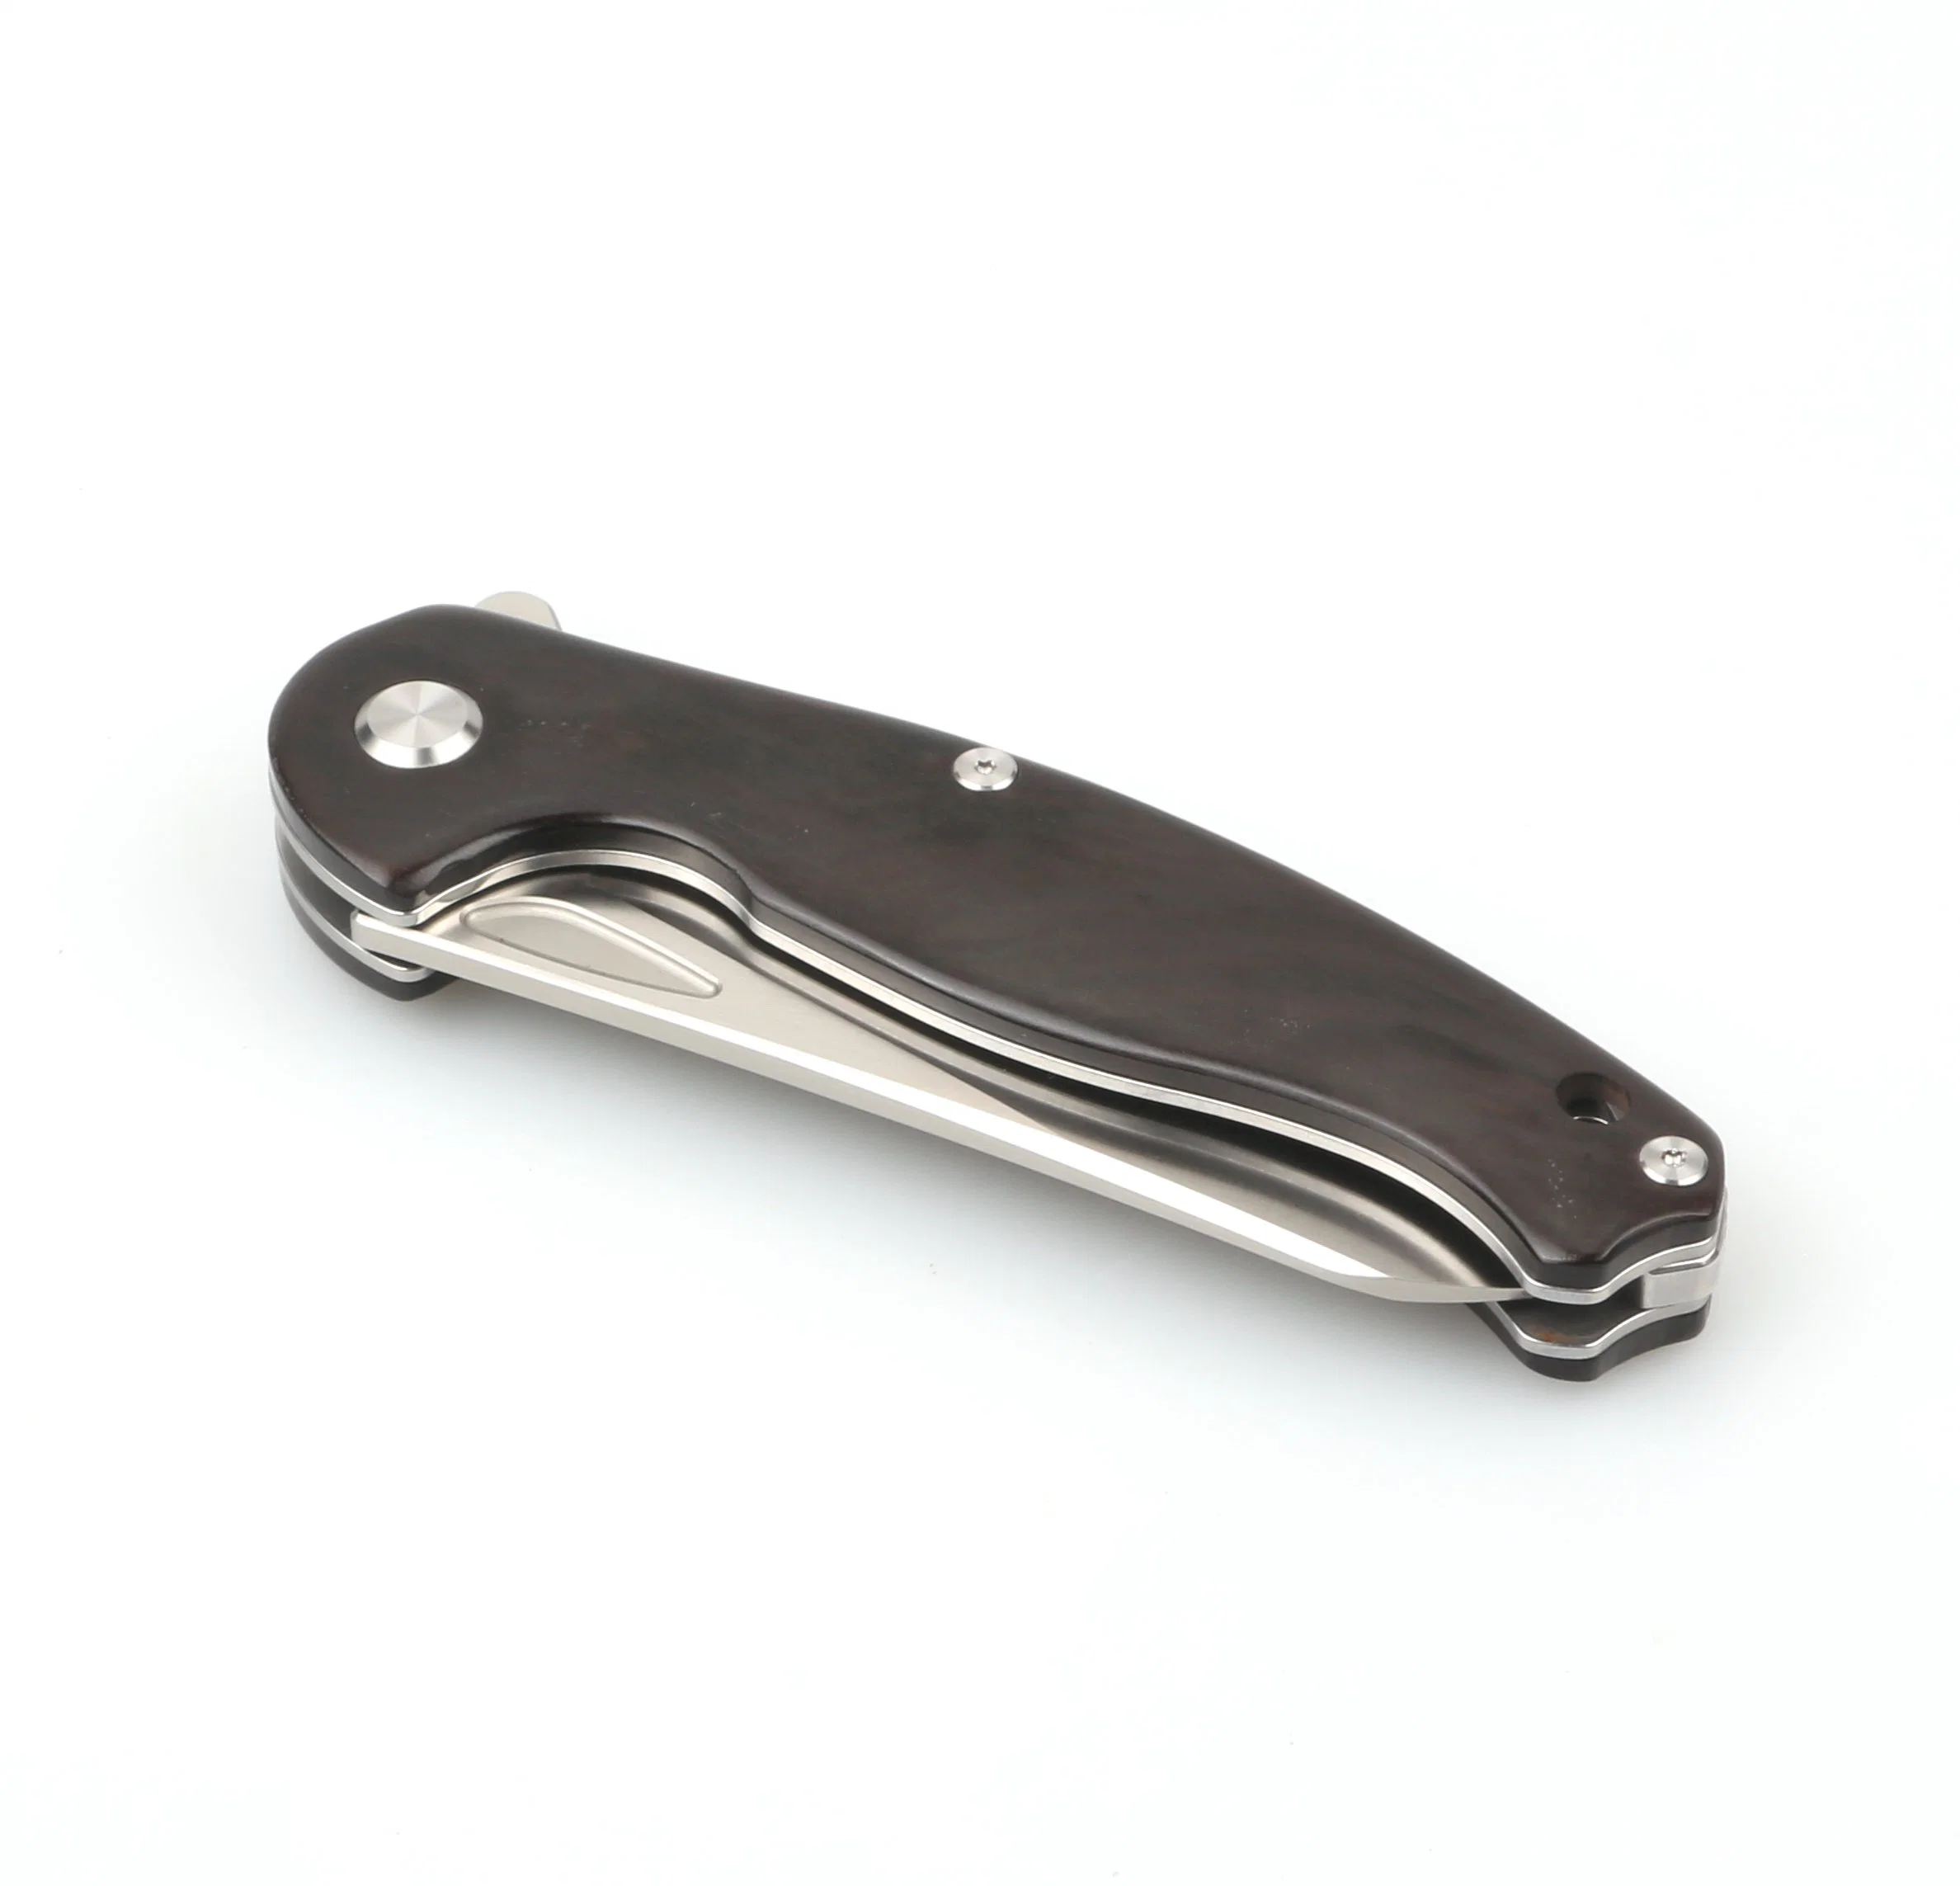 8.5" High quality/High cost performance  D2 Tool Steel Pocket Knife with Ebony Wood Handle (SE-K009)